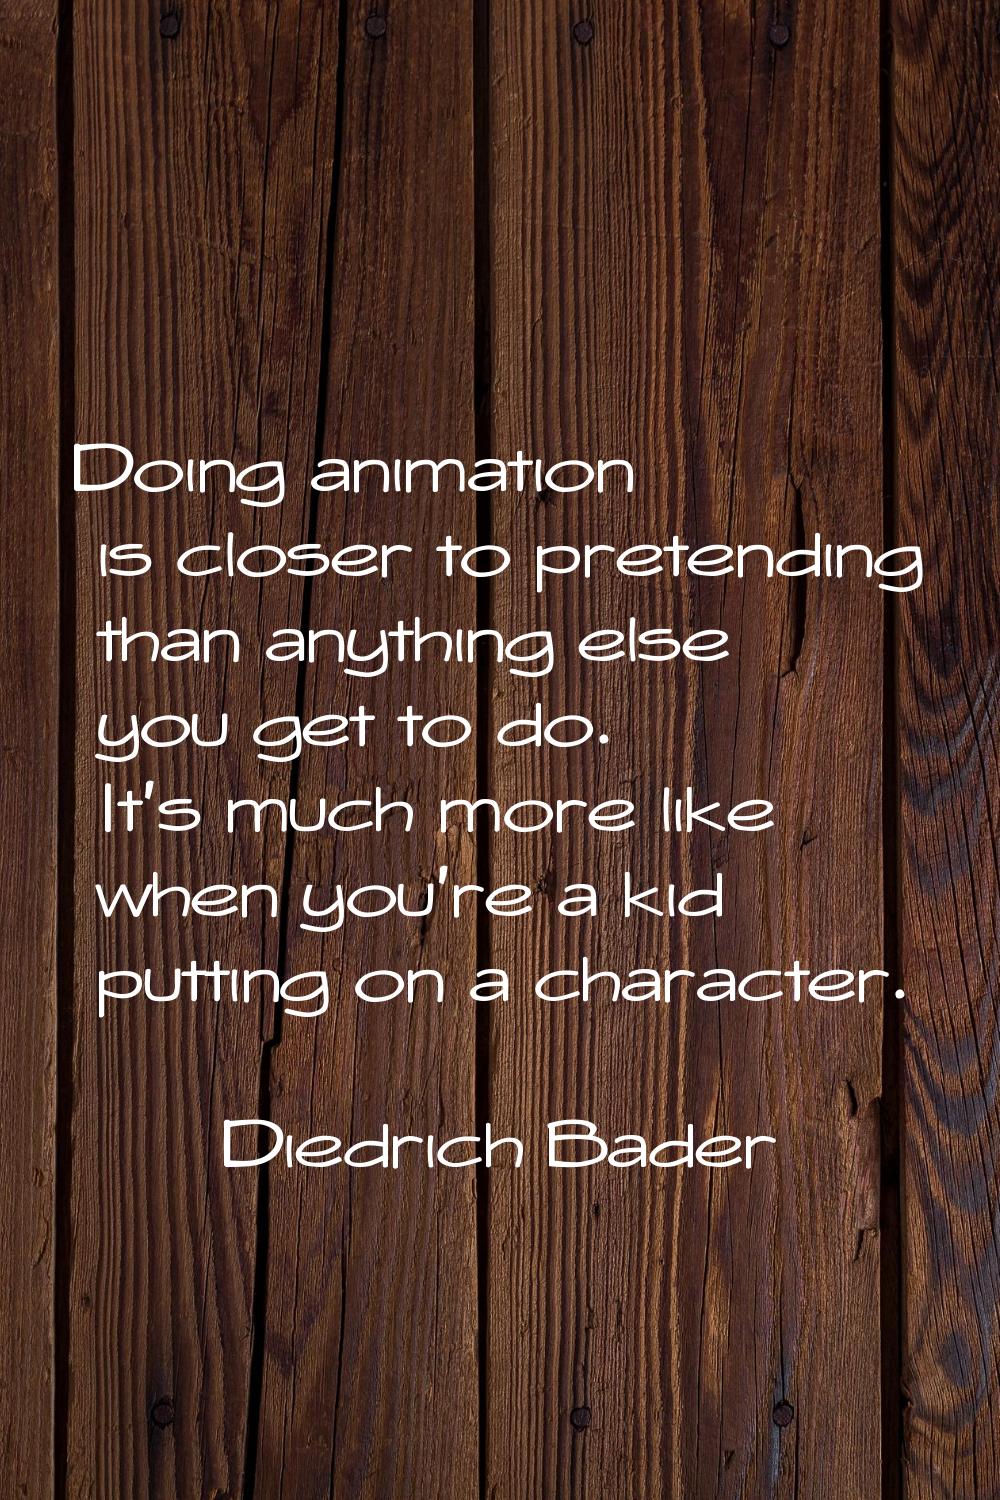 Doing animation is closer to pretending than anything else you get to do. It's much more like when 